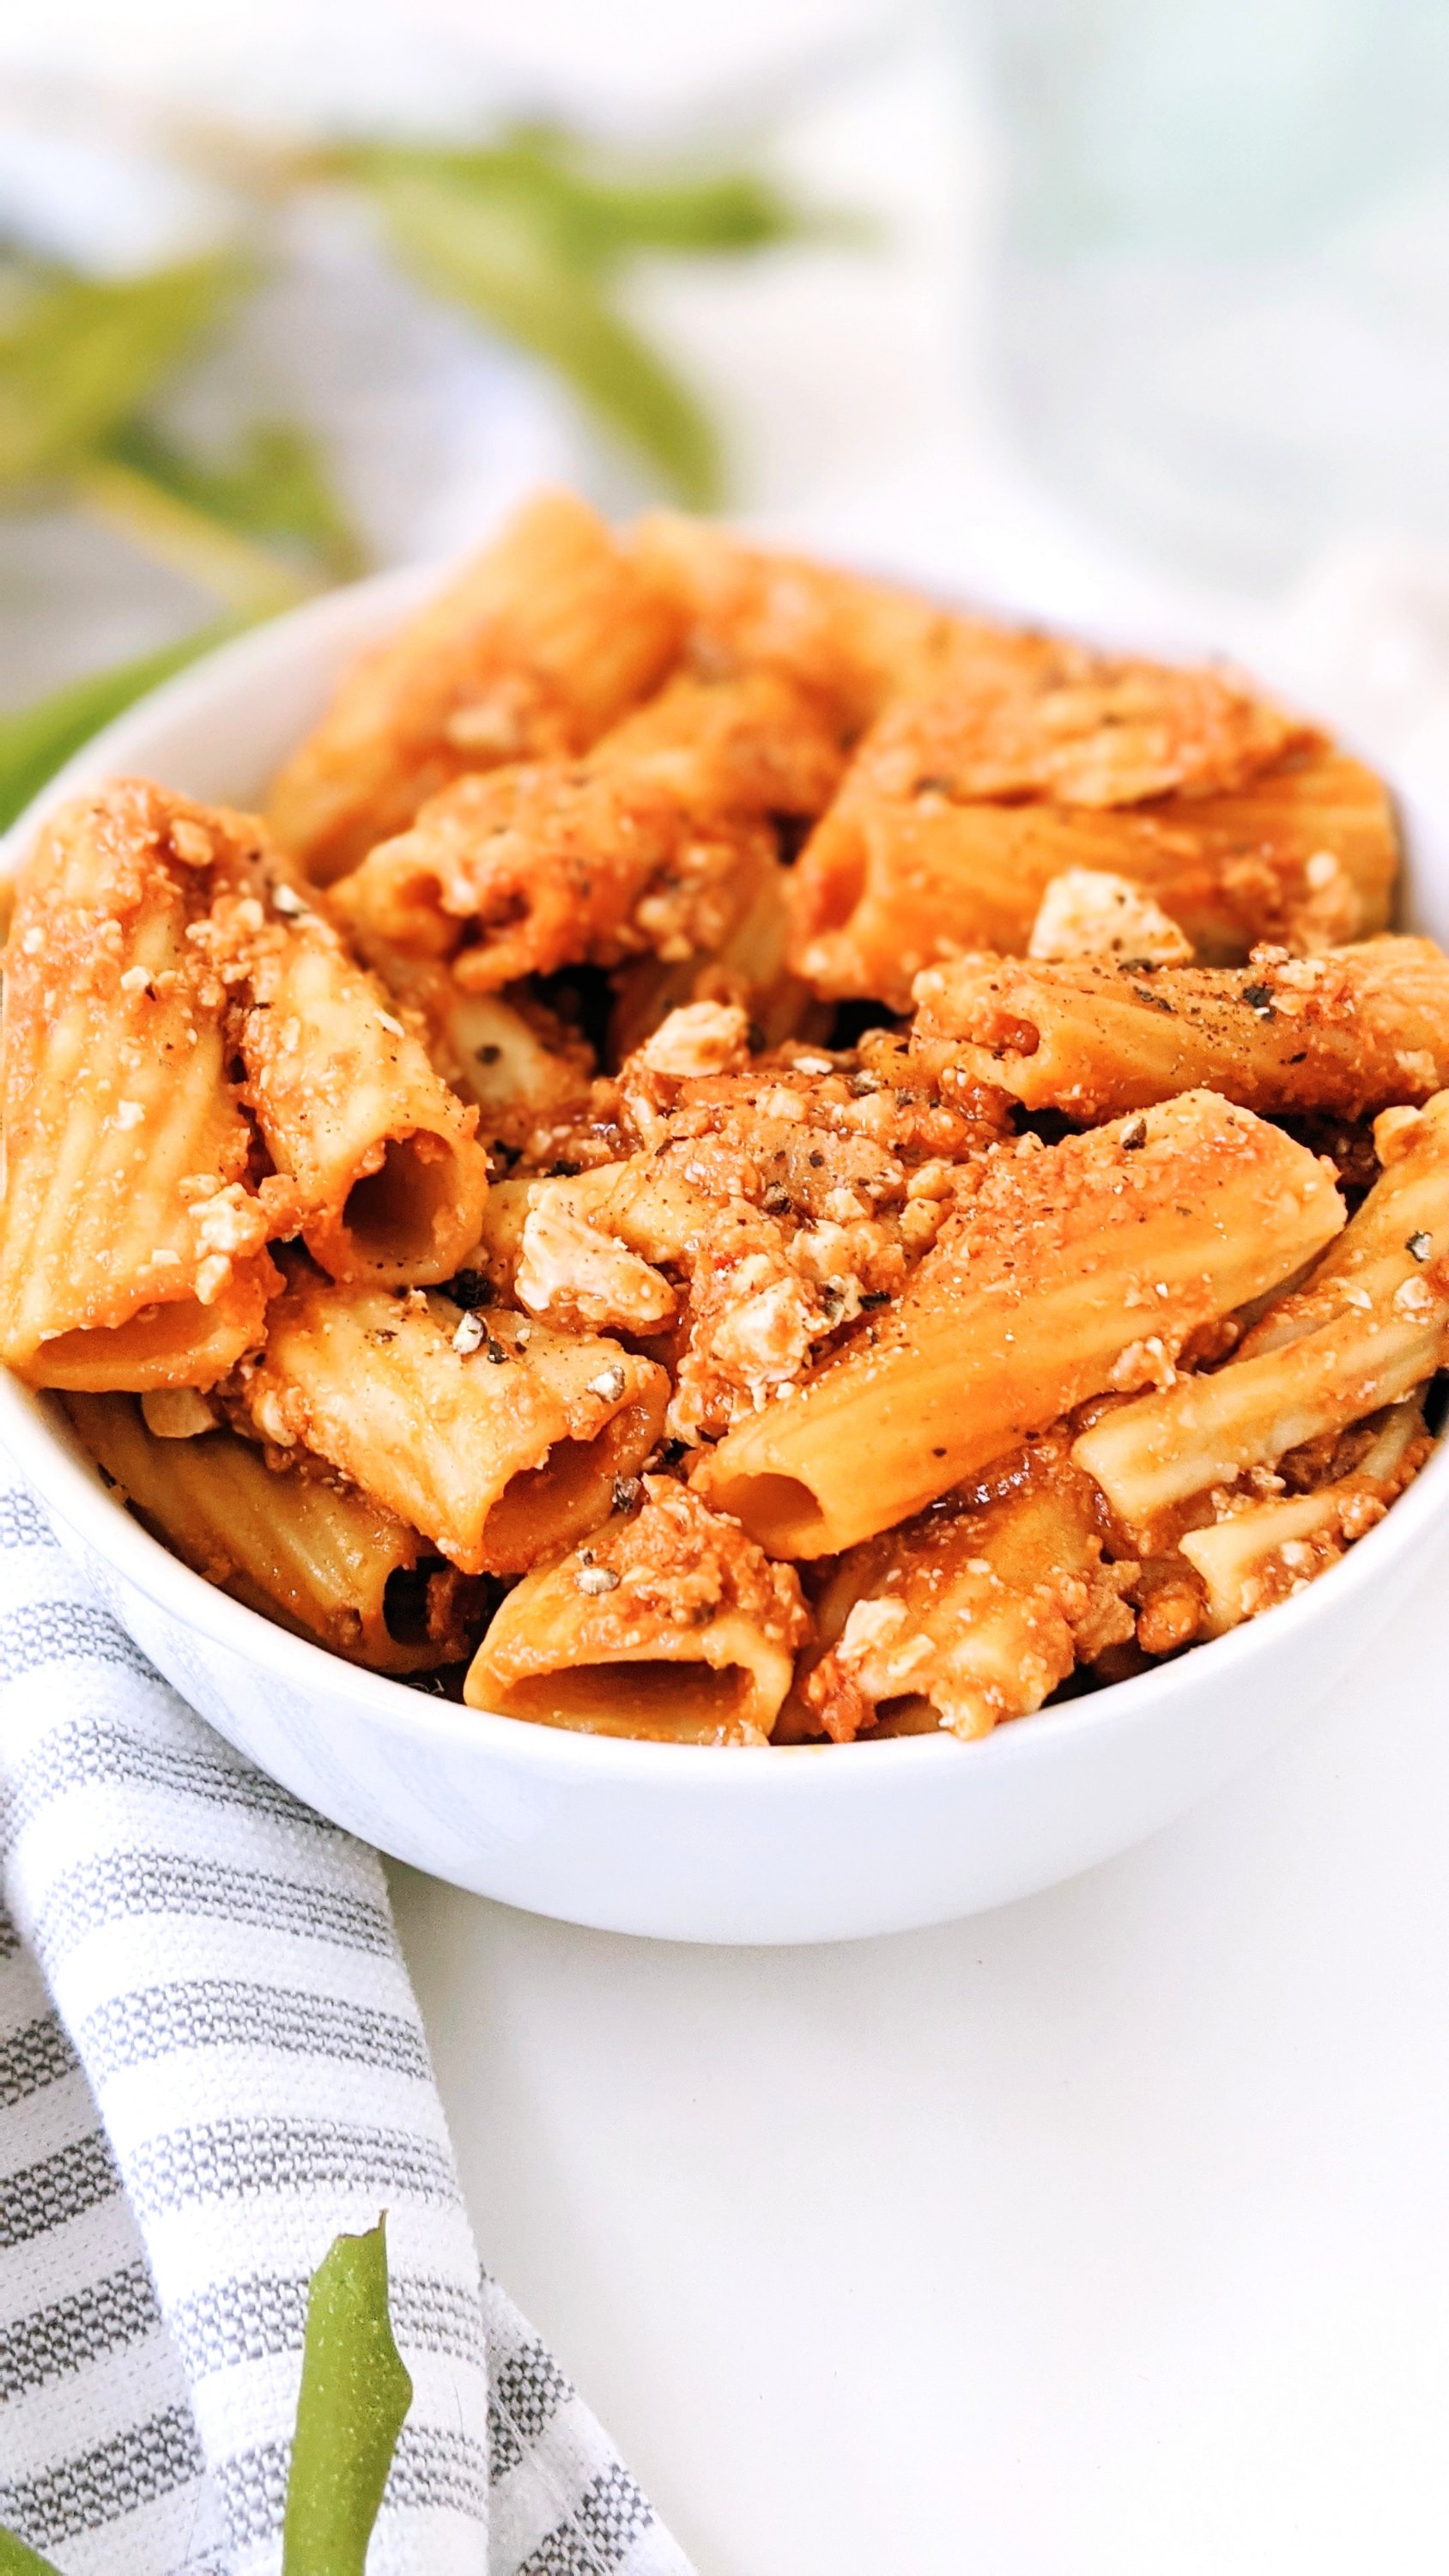 pasta with tofu bolognese sauce recipe healthy vegan spag bol tofu meat sauce for noodles pasta rigatoni bolognese with tofu healthy italian meals meatless